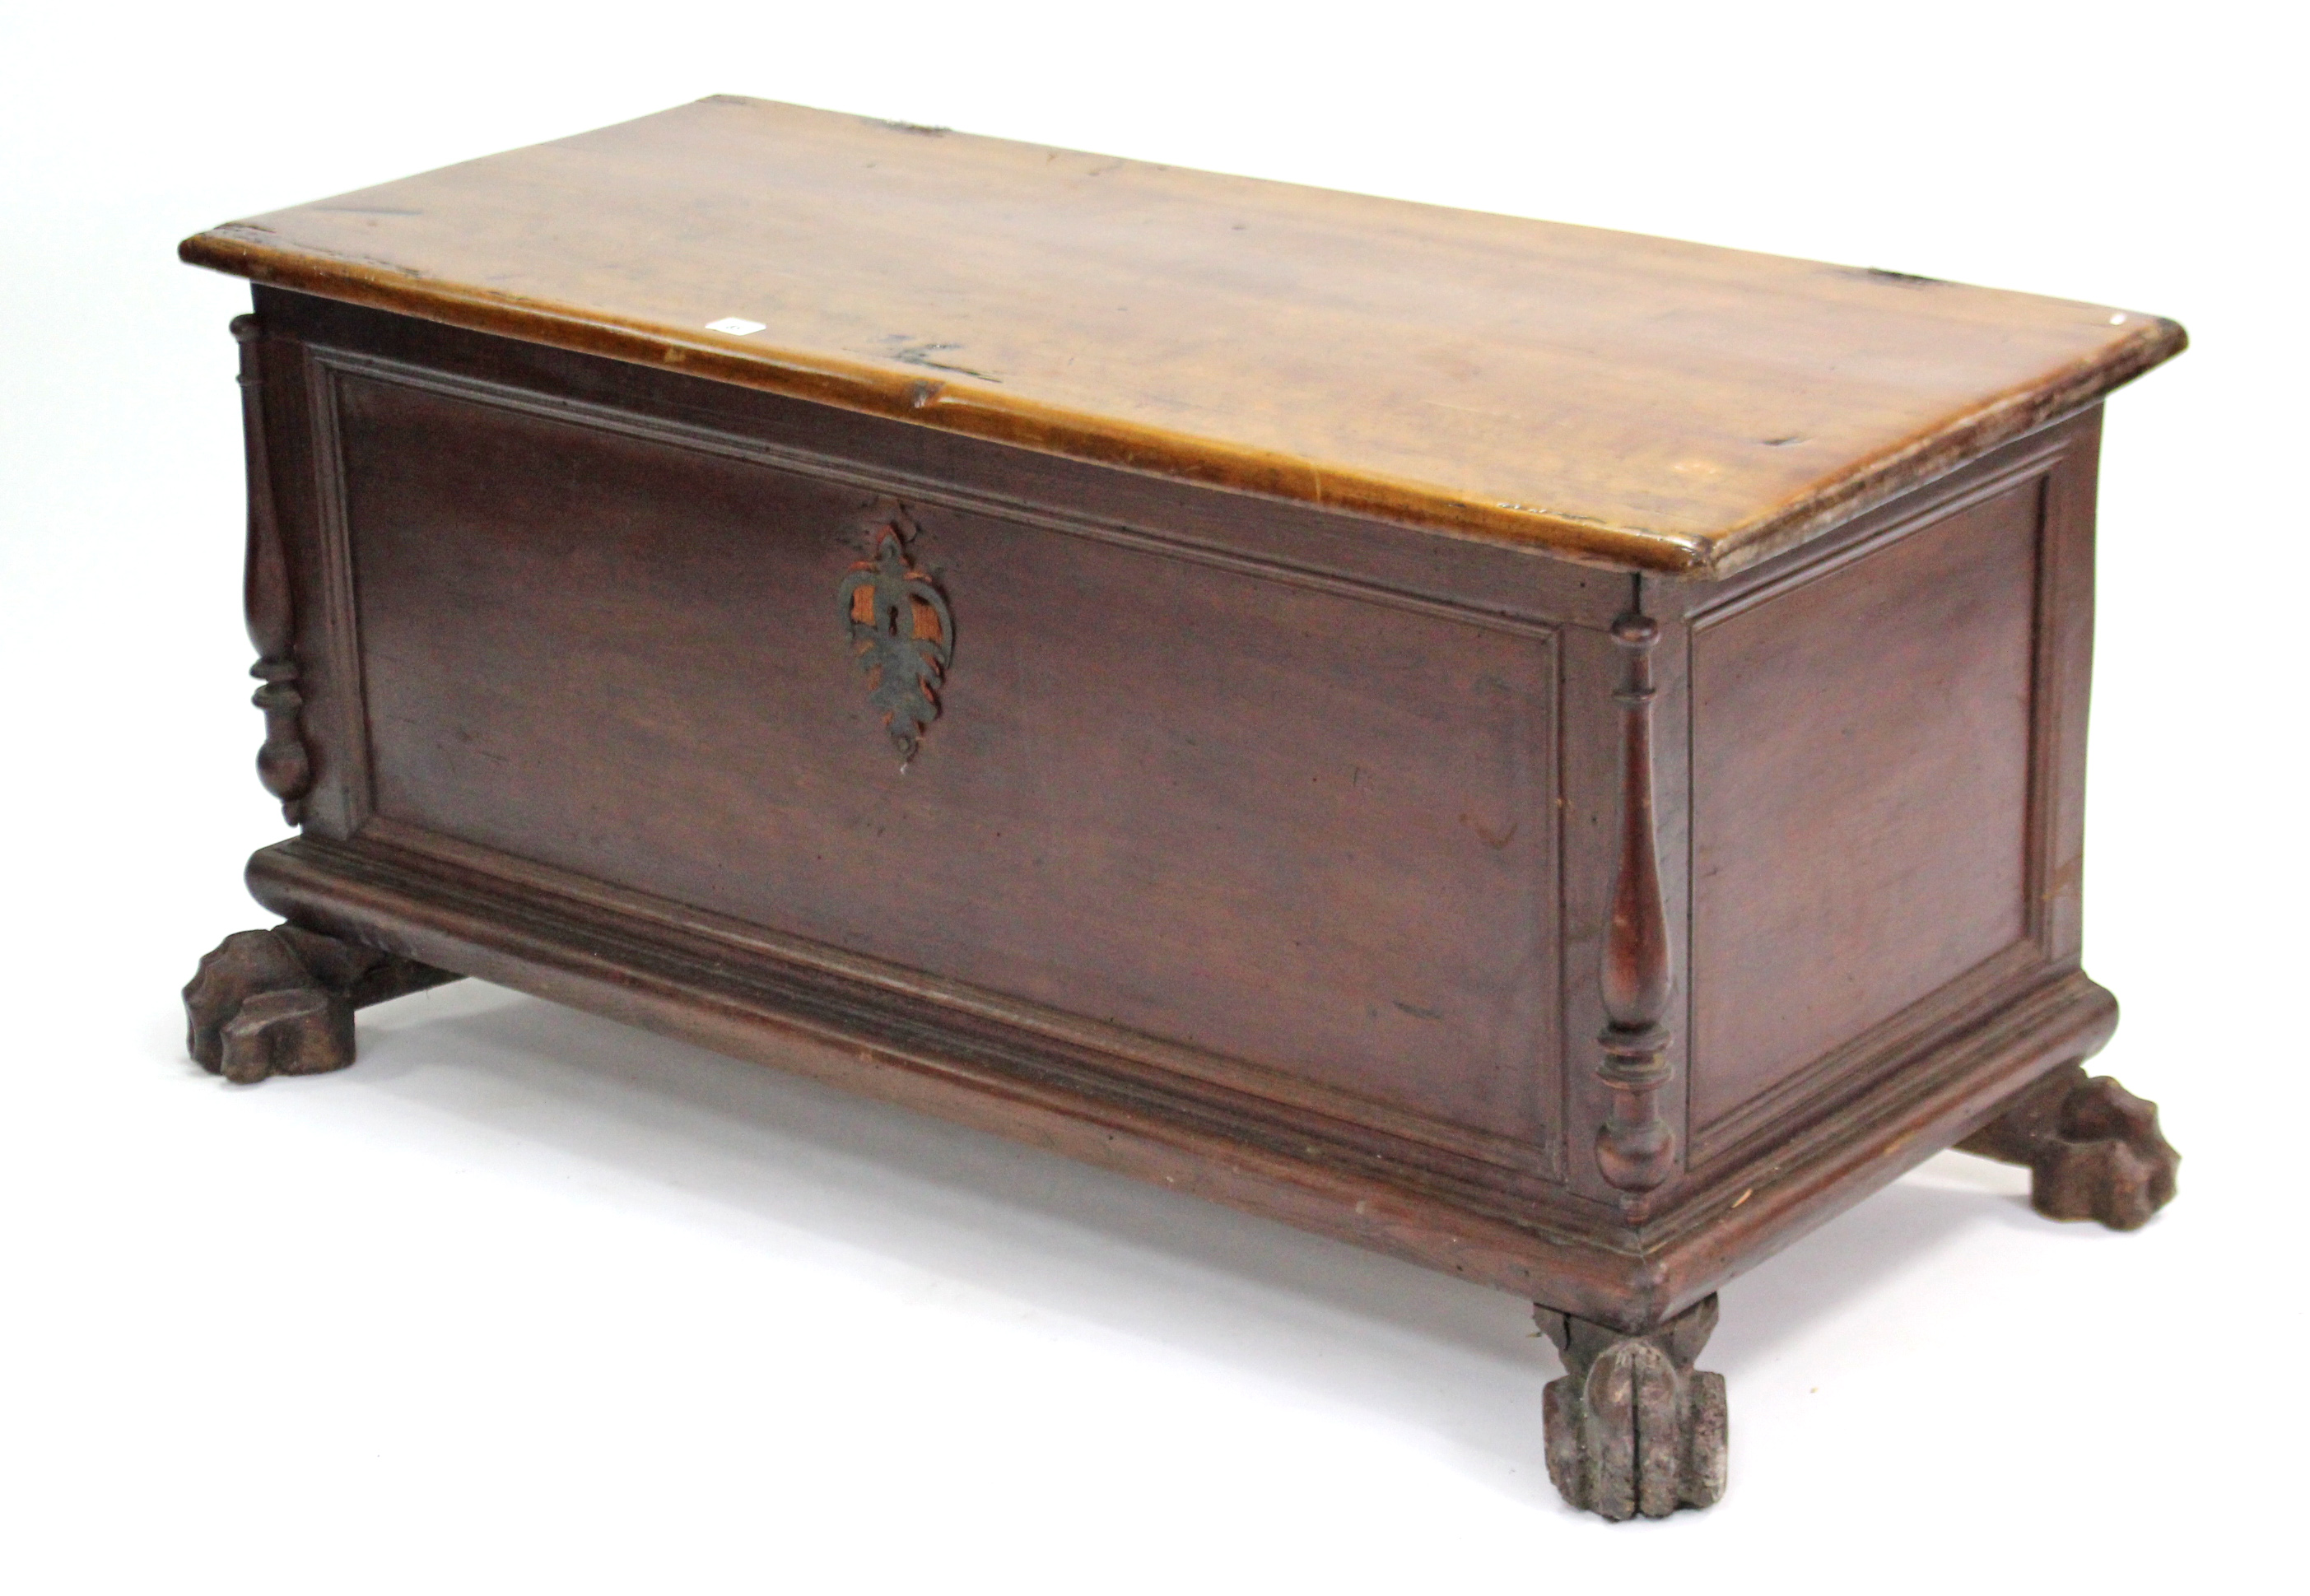 A 19th century continental hardwood coffer with hinged lift-lid, panelled front & sides, & on carved